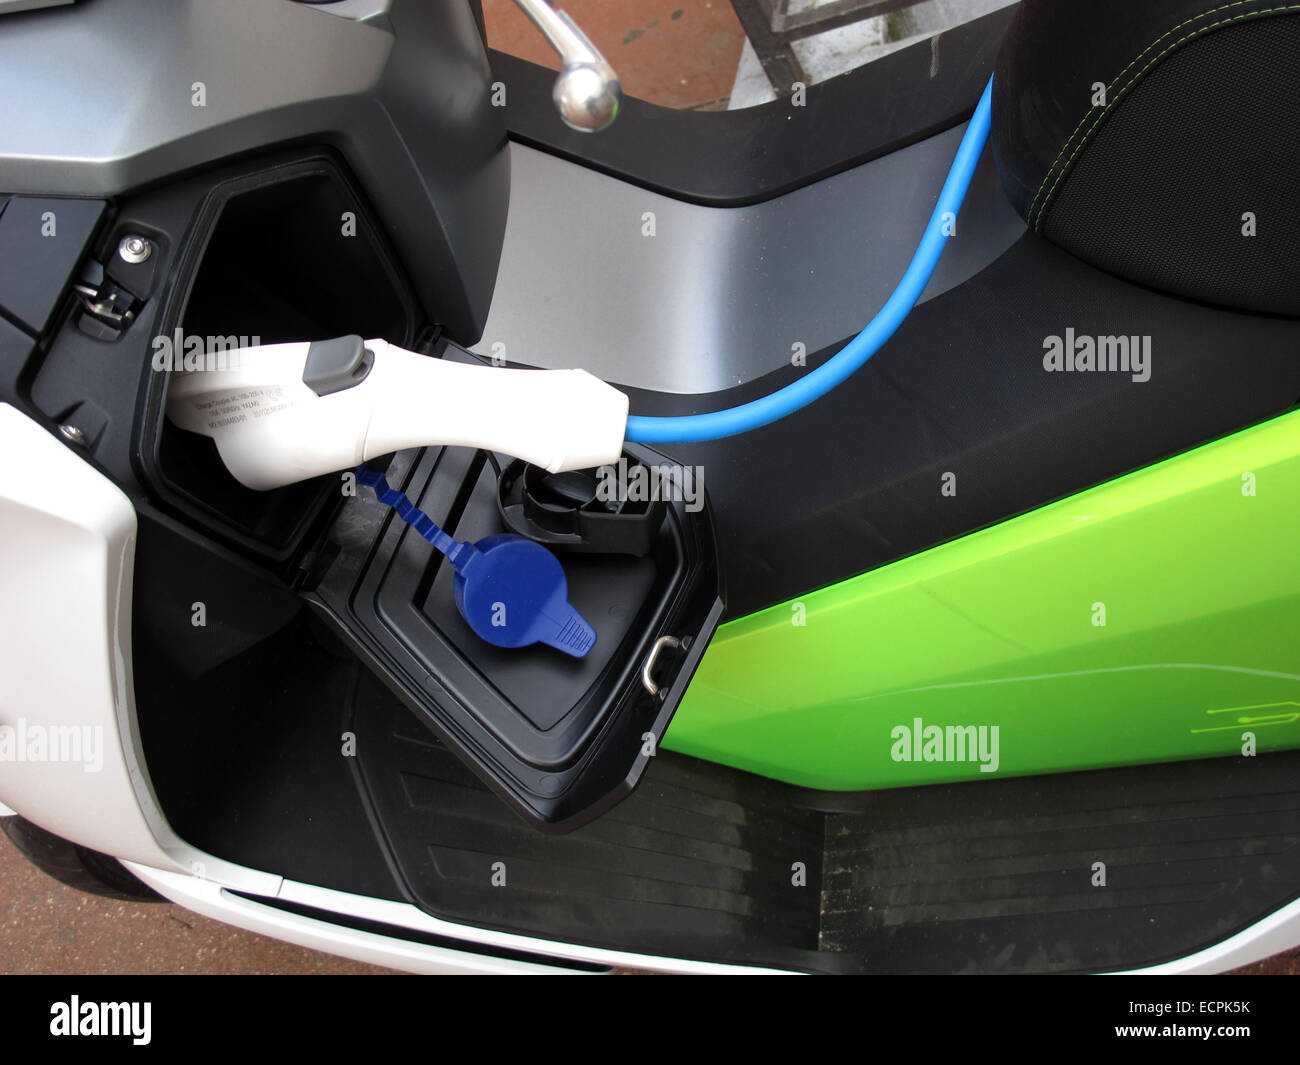 Bmw C Evolution Charging Battery Electric Scooter Electric Stock Photo Alamy